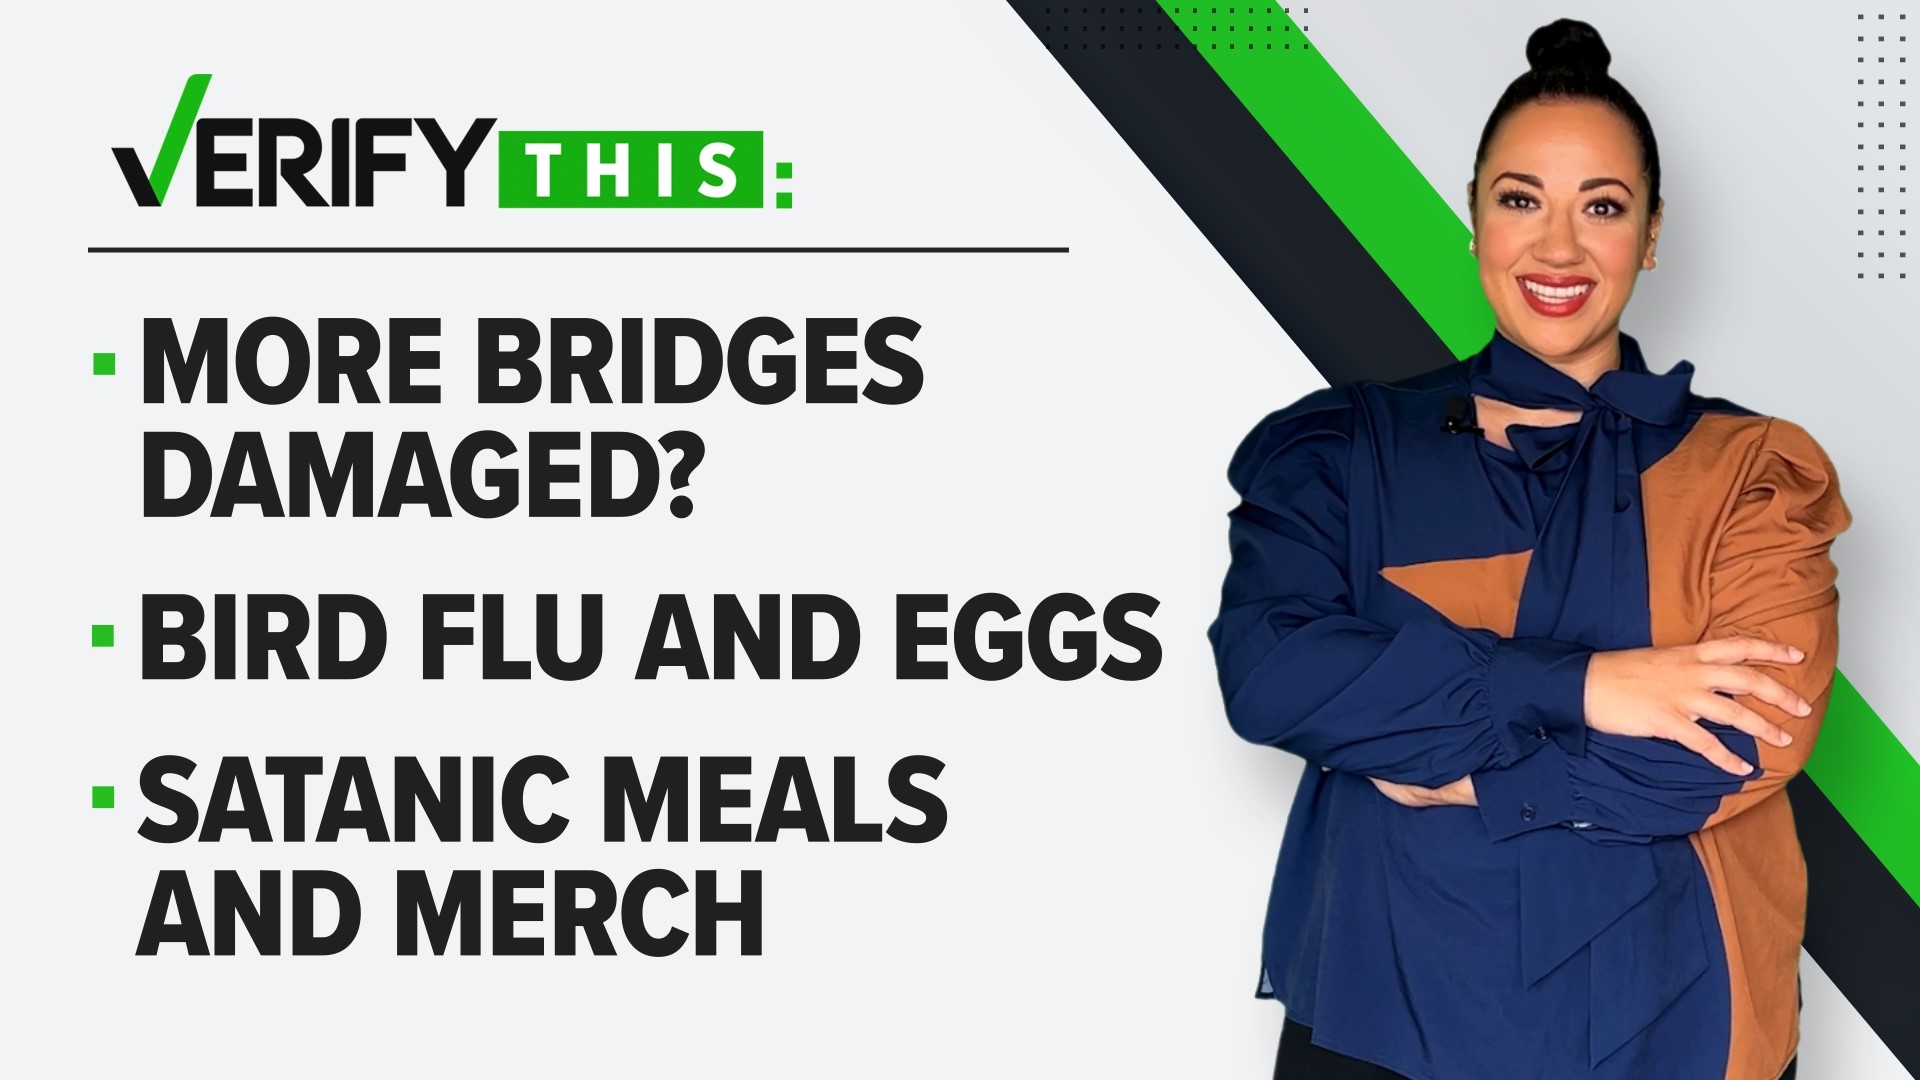 In this week's episode, we verify if more bridges were damaged on the same day as the one in Baltimore and if it's safe to eat eggs during the bird flu outbreak.